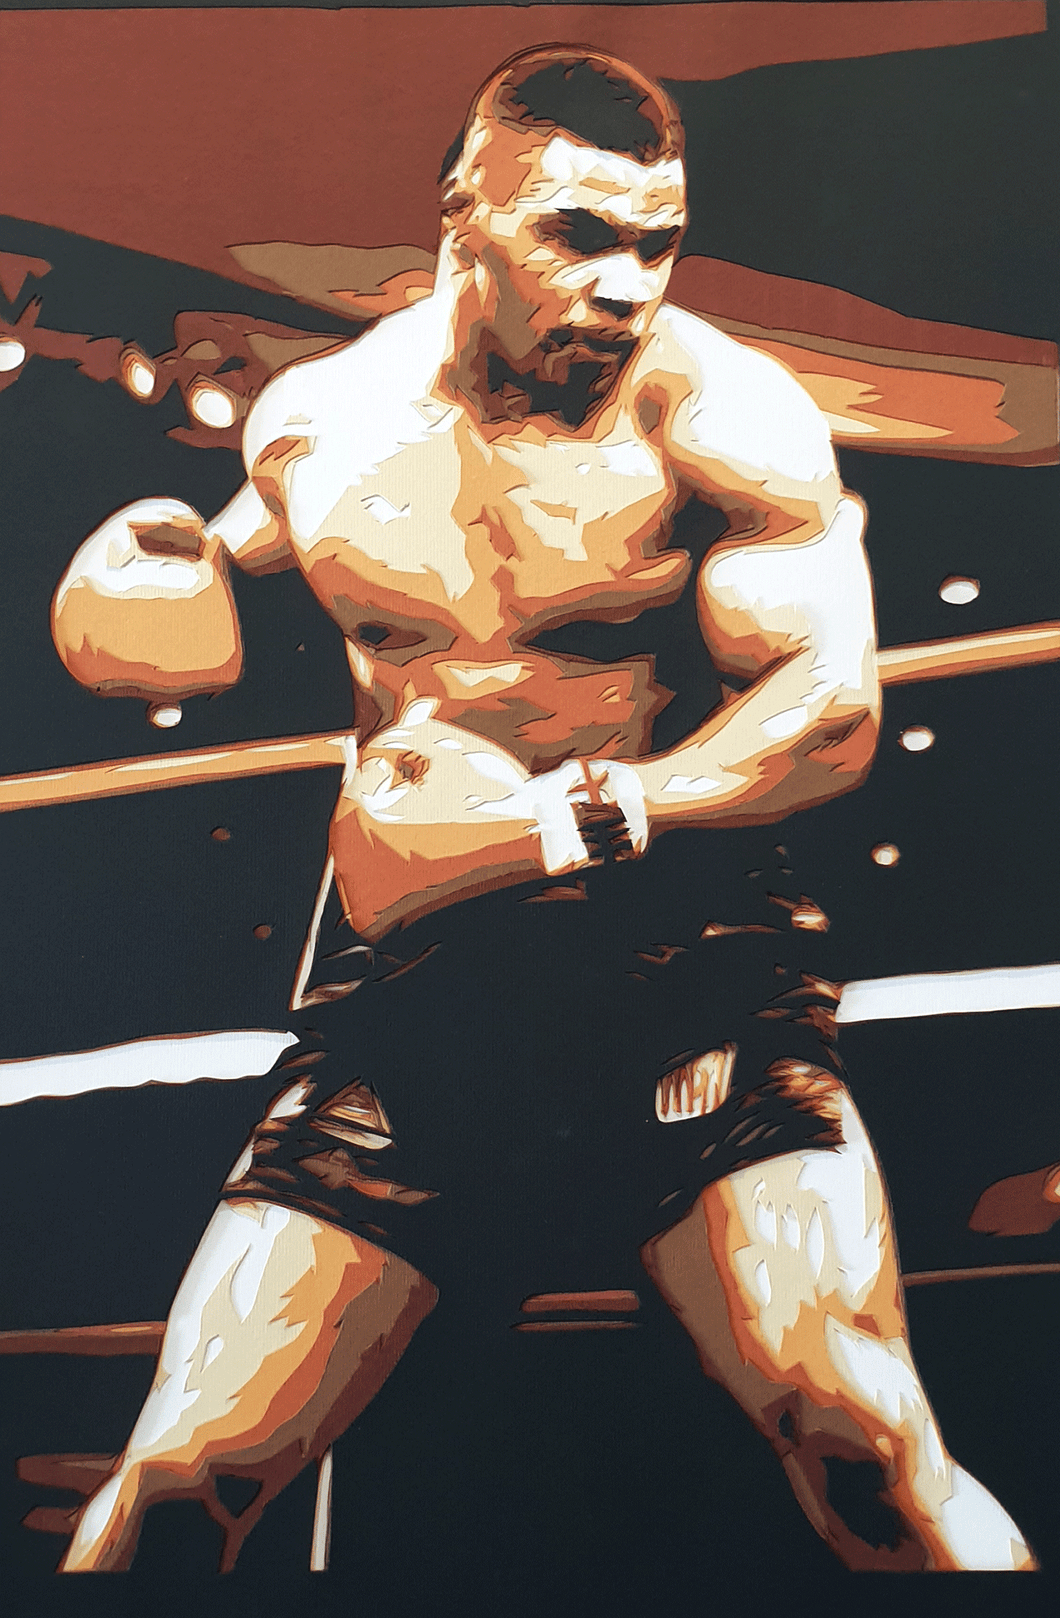 Iron Mike Tyson by Rick Sharif - FRAMED  [A3 Size (297 x 420 mm) (11.7 x 16.5 in) in a FRAME]